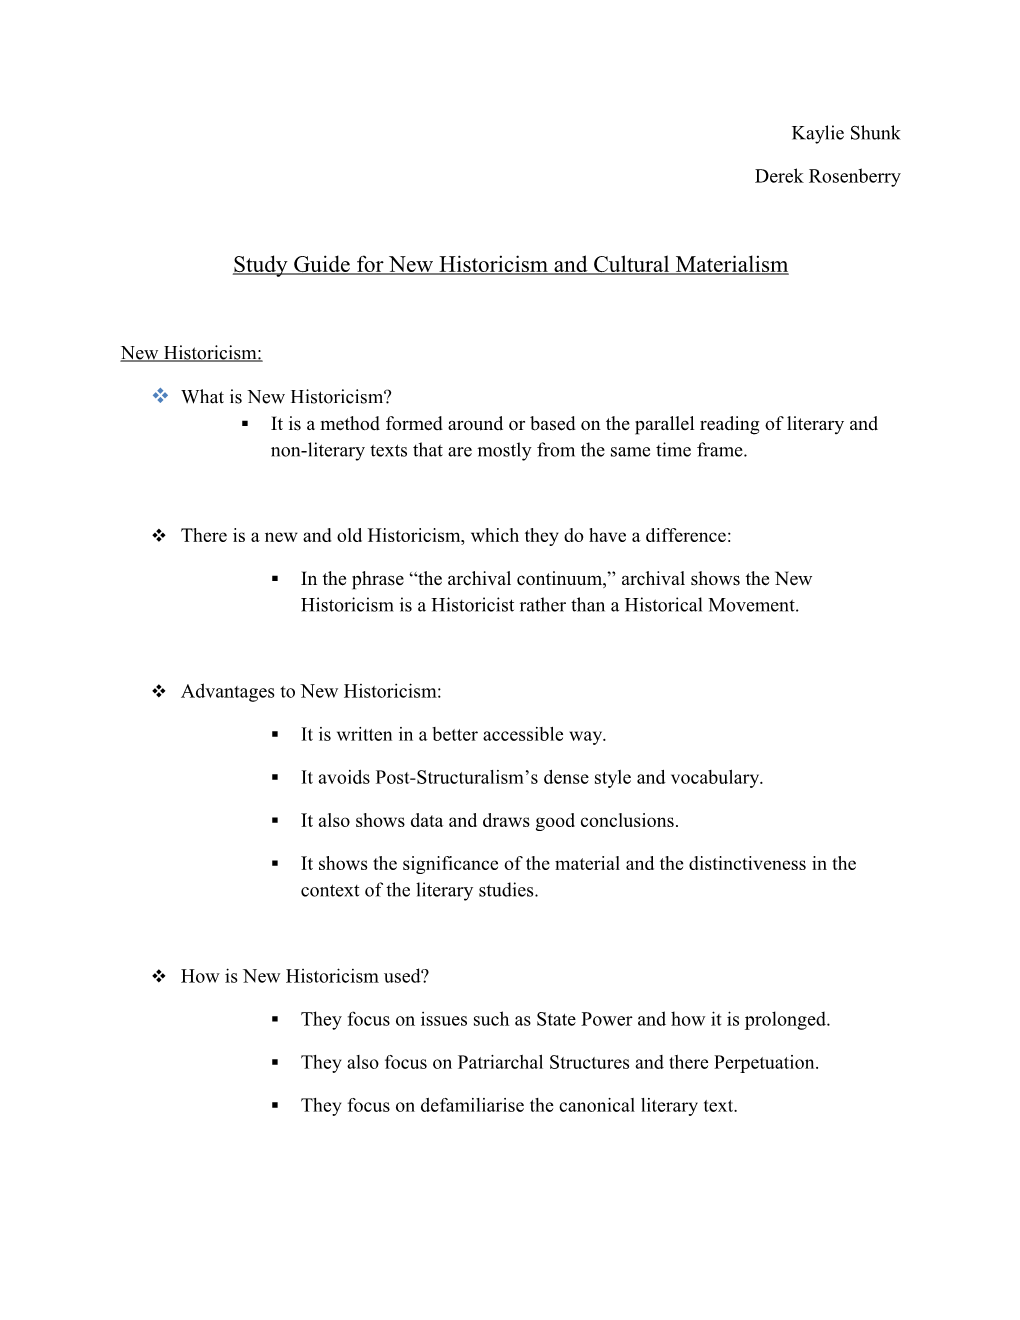 Study Guide for New Historicism and Cultural Materialism